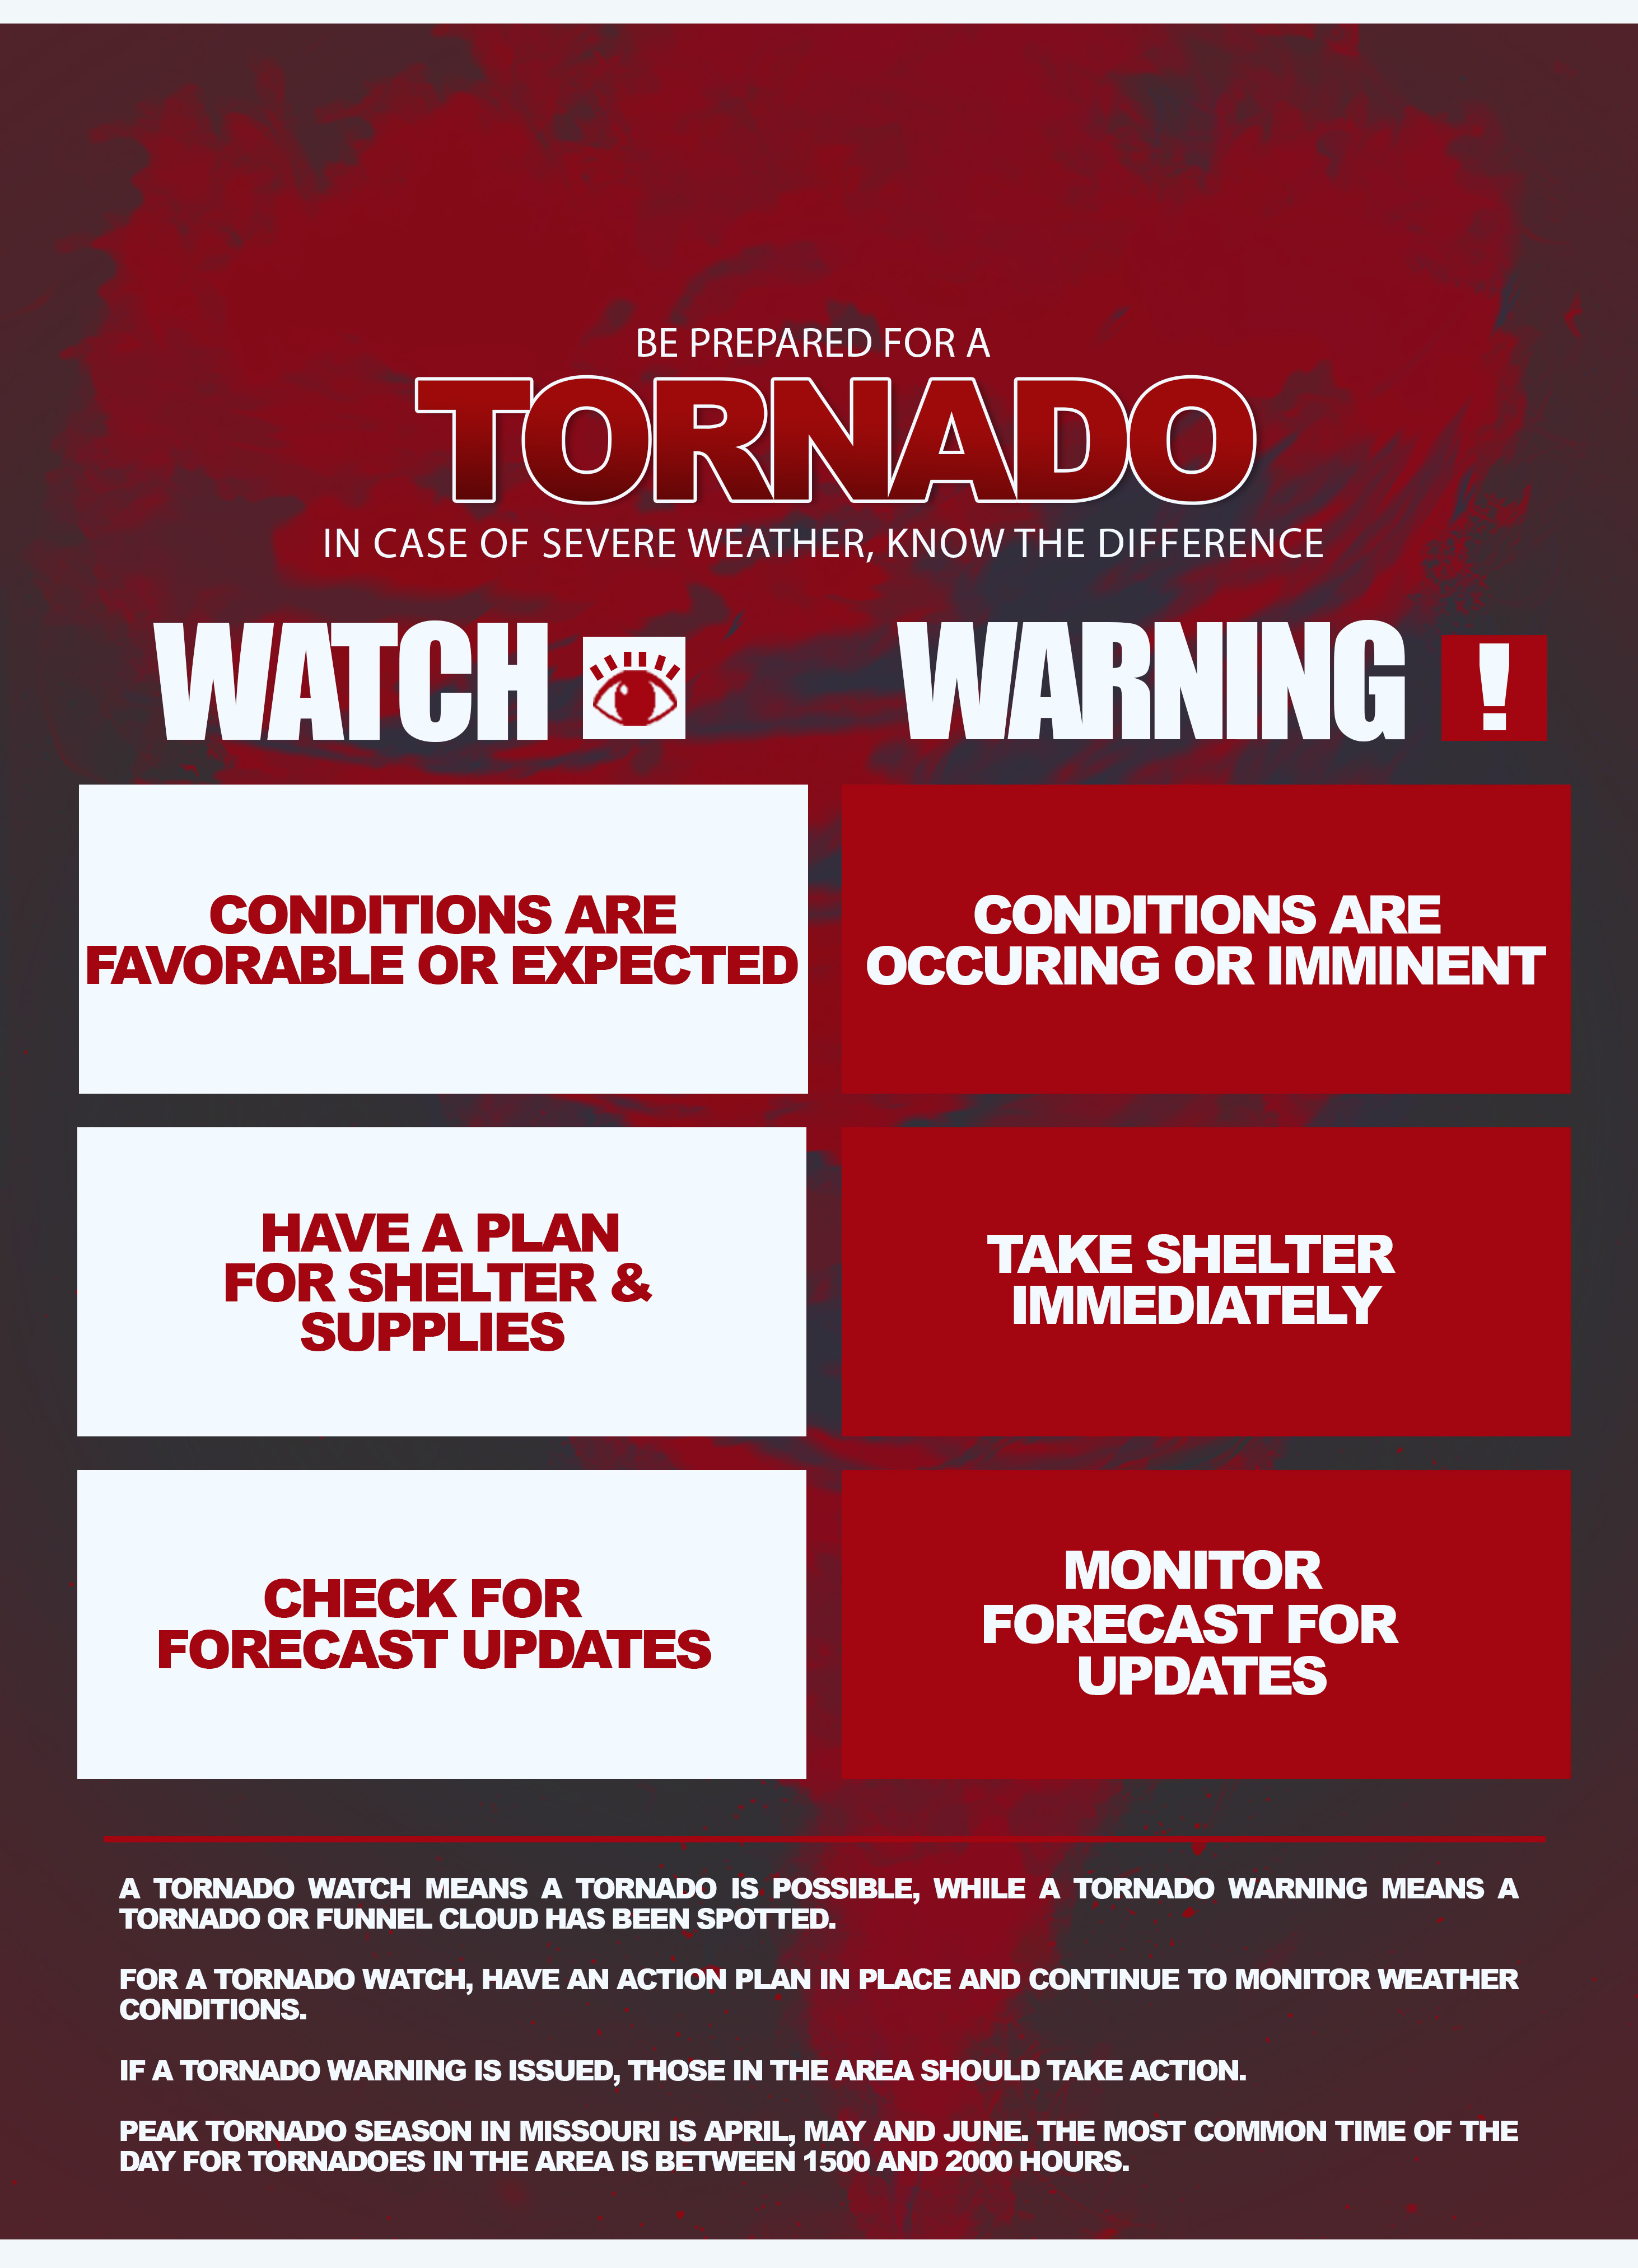 Tornado Warning! Get Ready with Above-Ground Storm Shelters